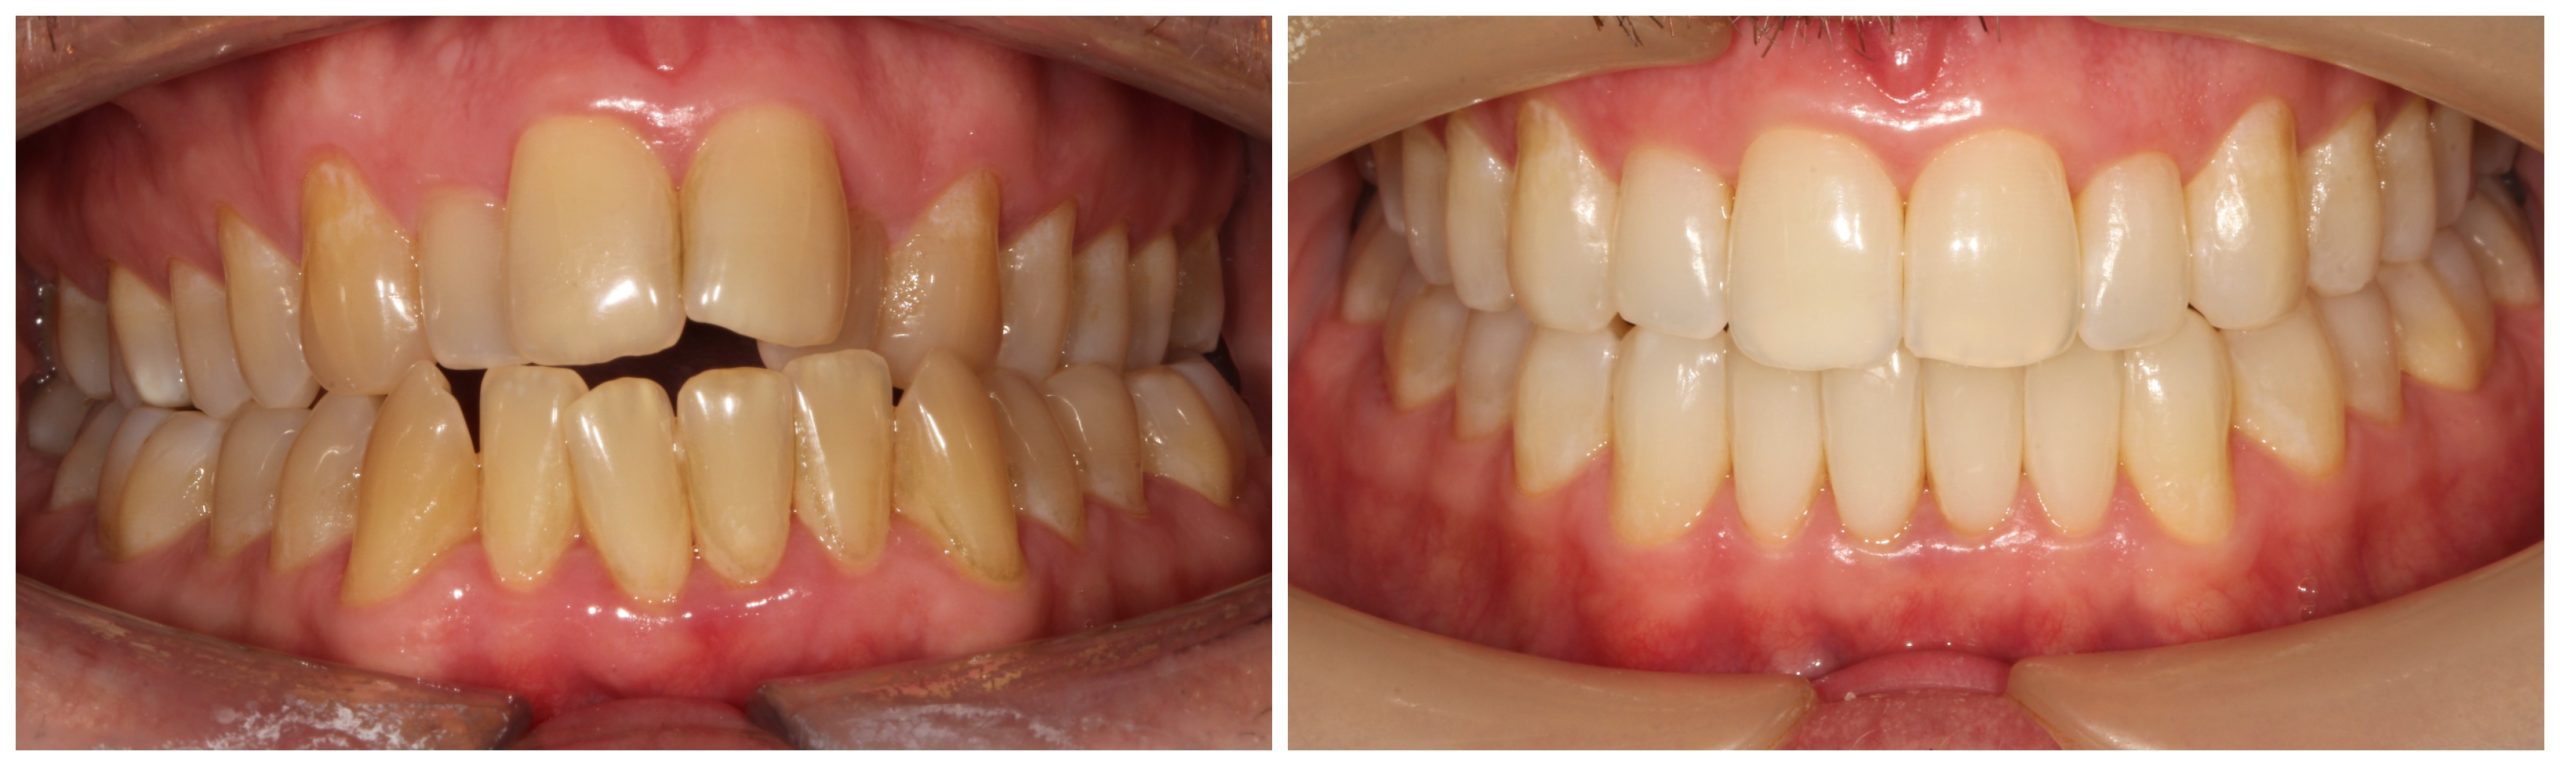 before and after Invisalign treatment